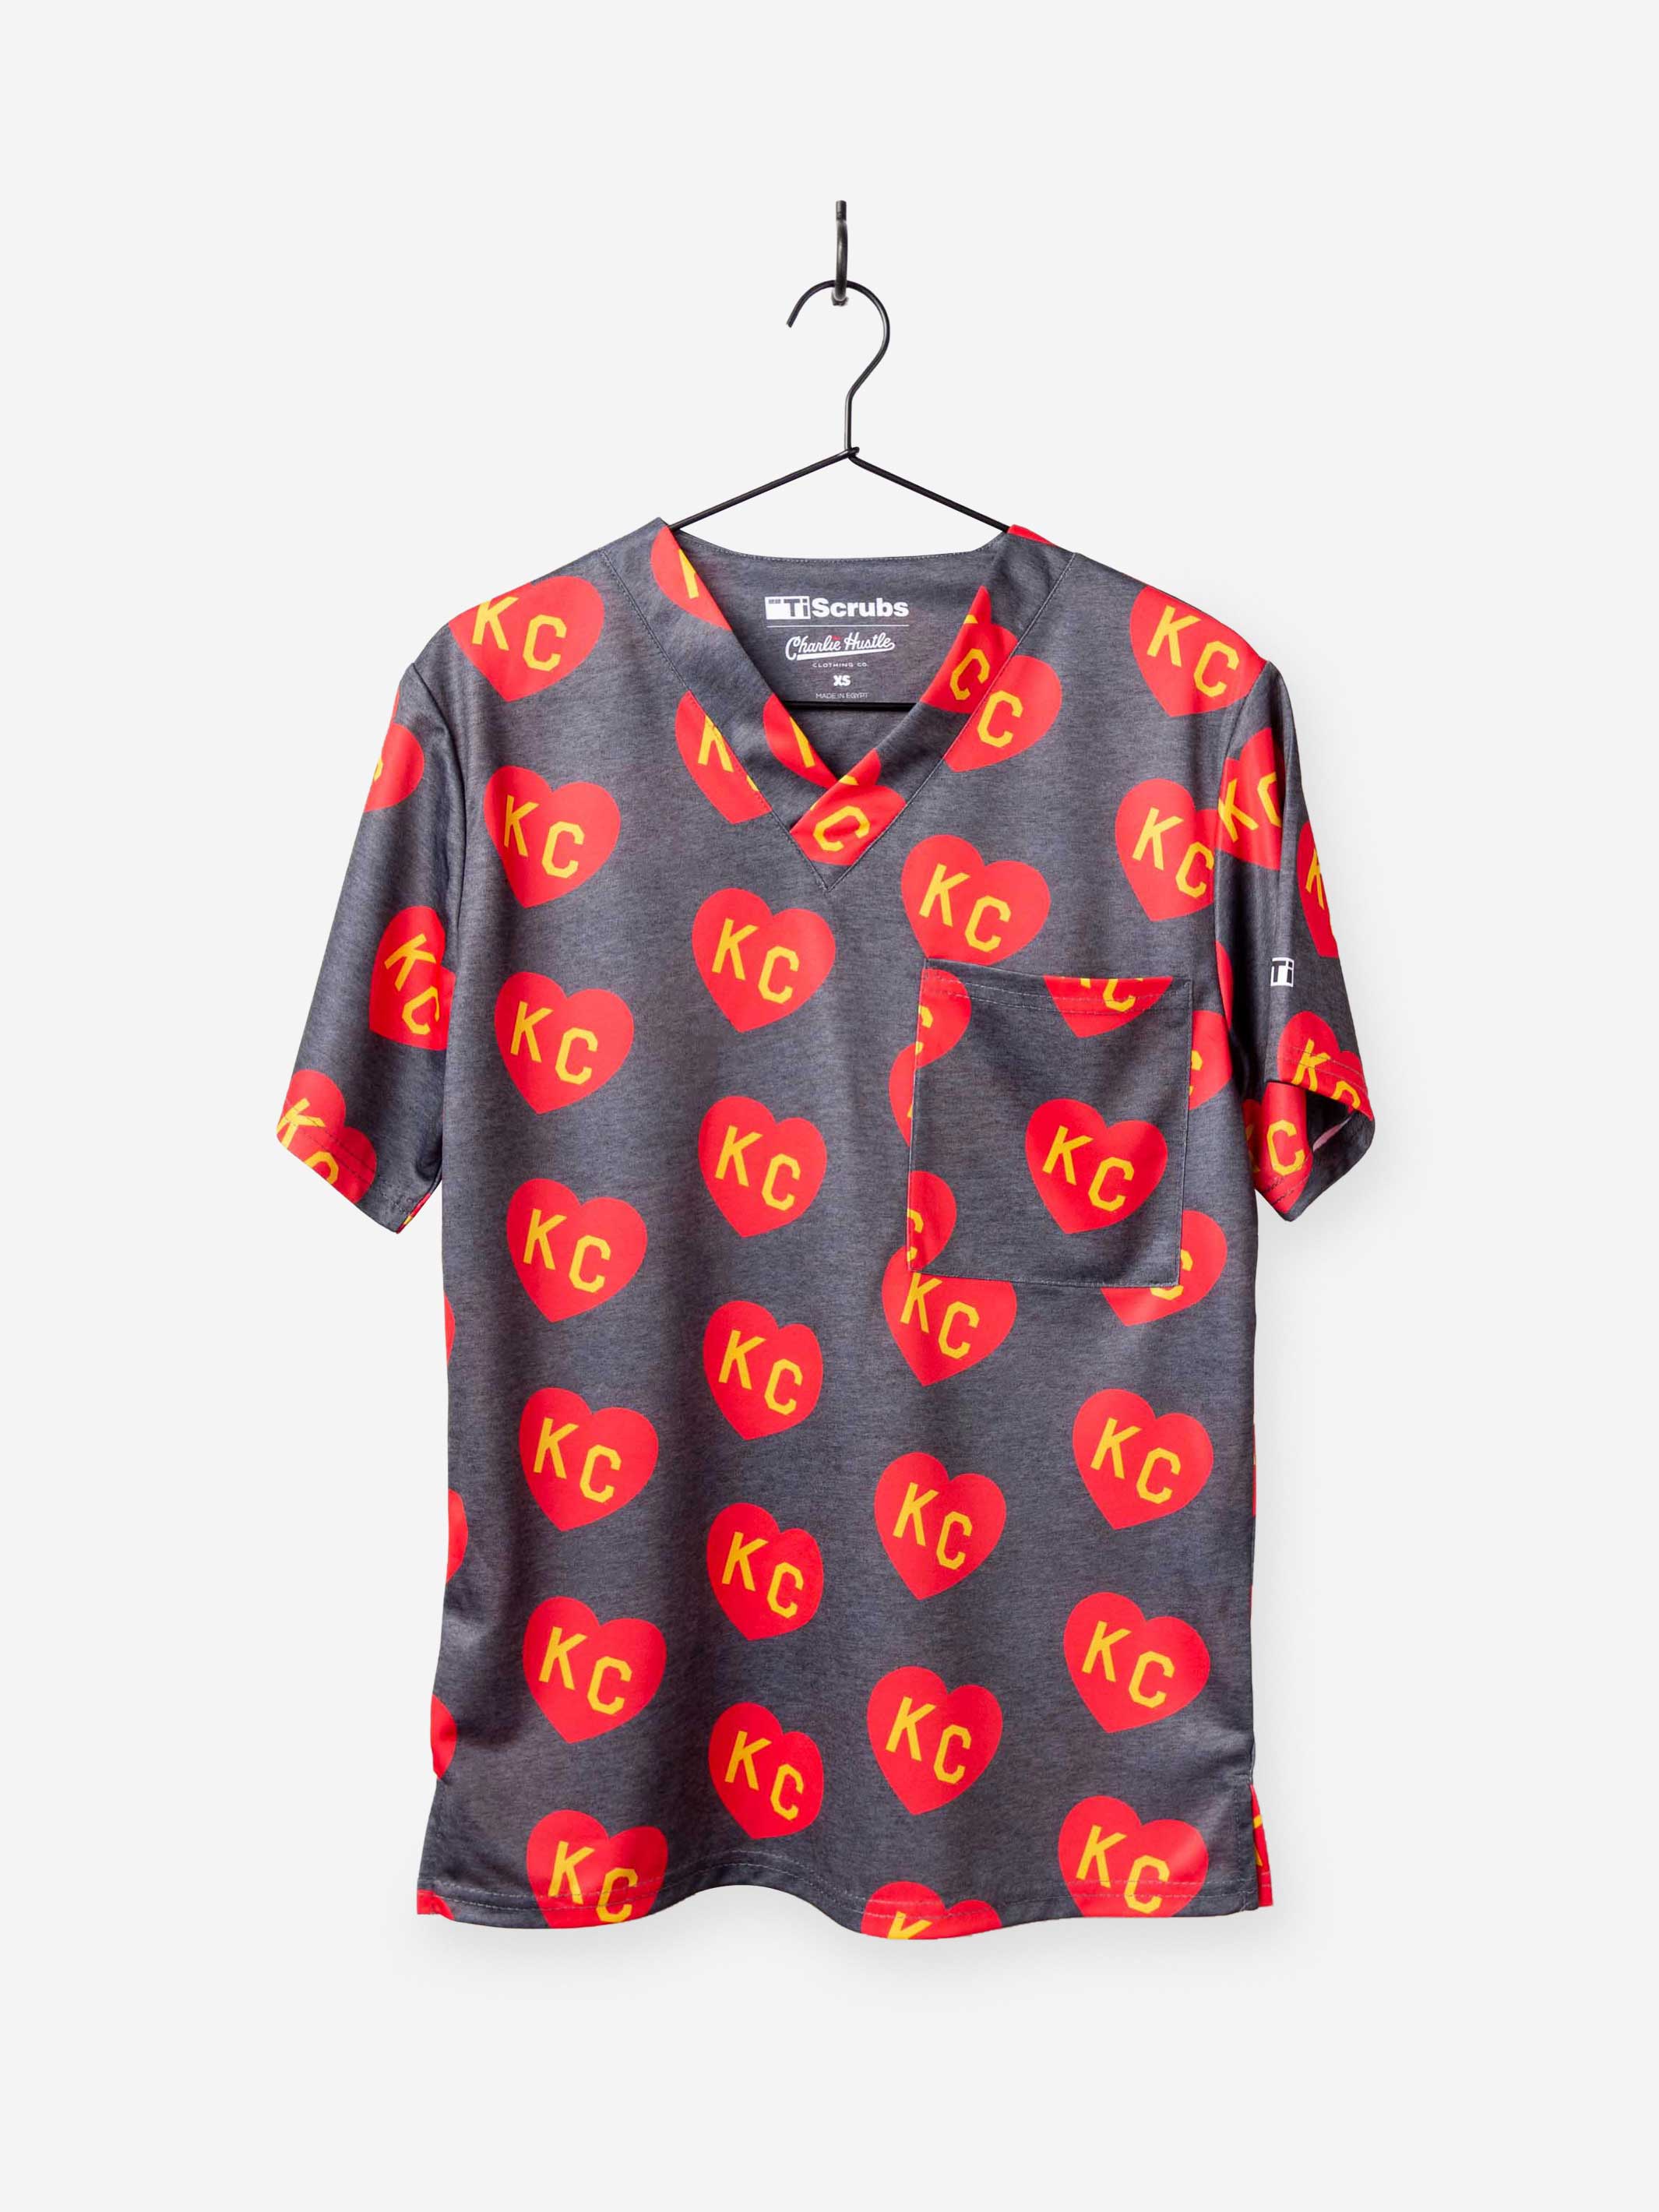 Men&#39;s Charlie Hustle Print Scrub Top with KC Heart All Over Pattern in Red and Gold and heather gray